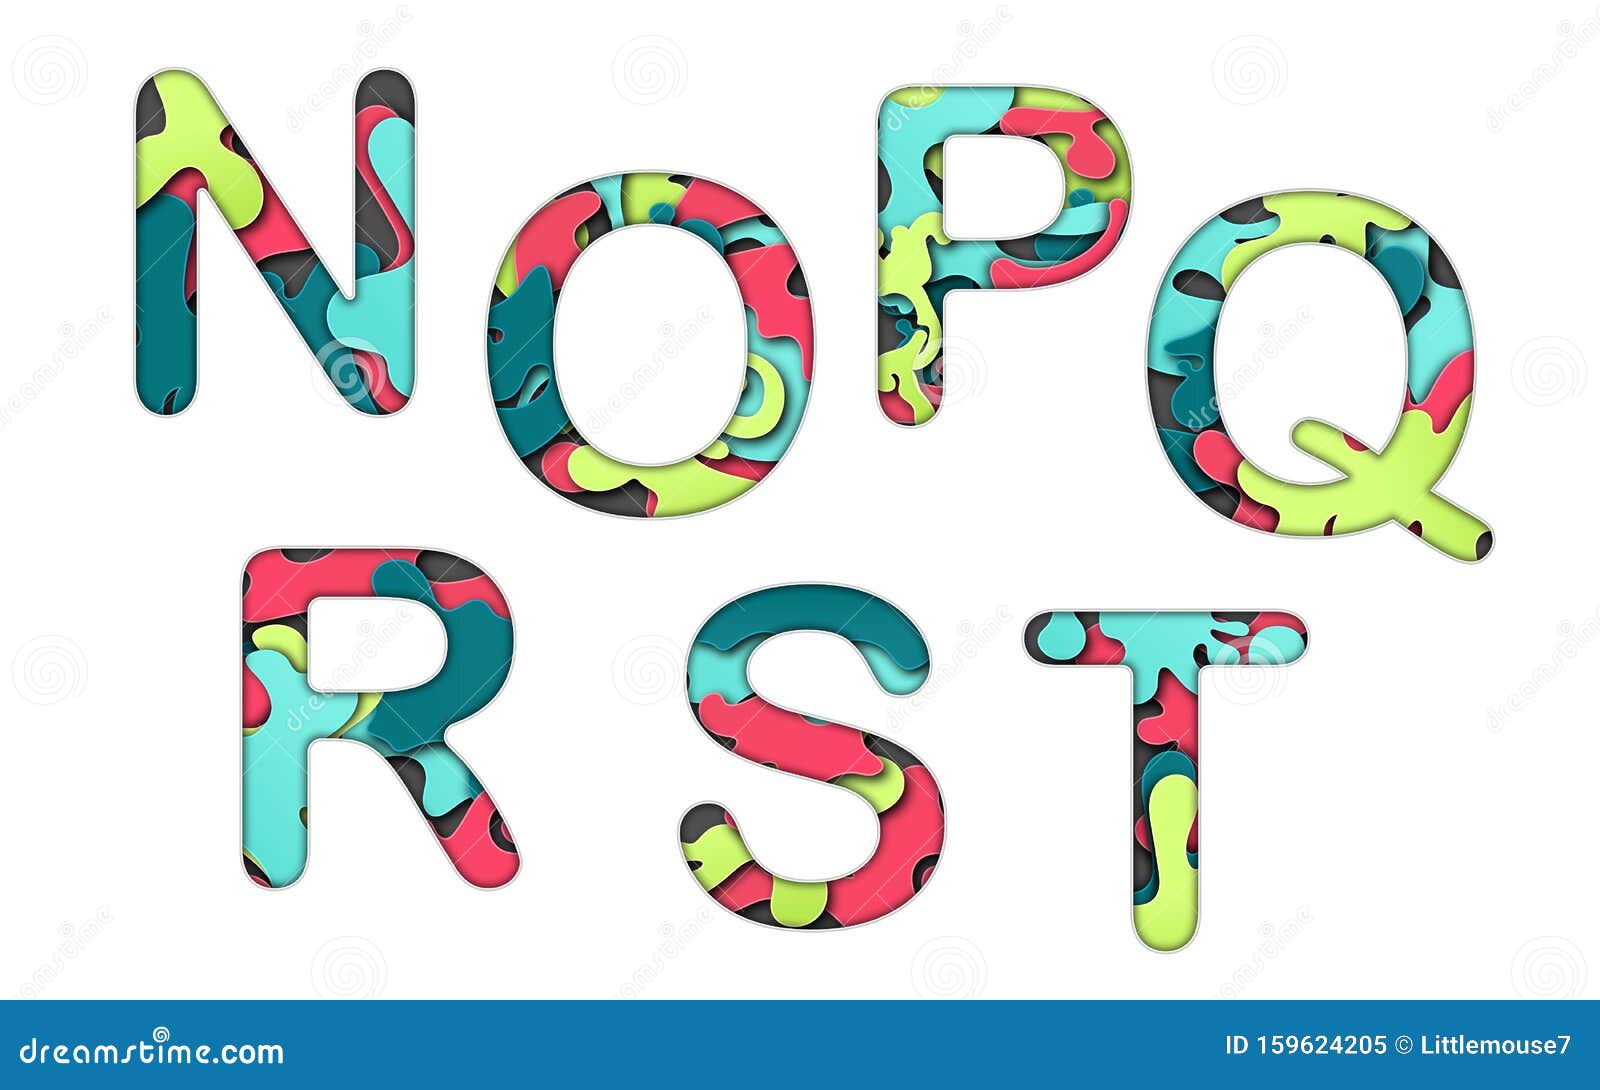 set of letters font n, o, p, q, r, s and t. multilayer colorful letters. paper art carving. creative typography